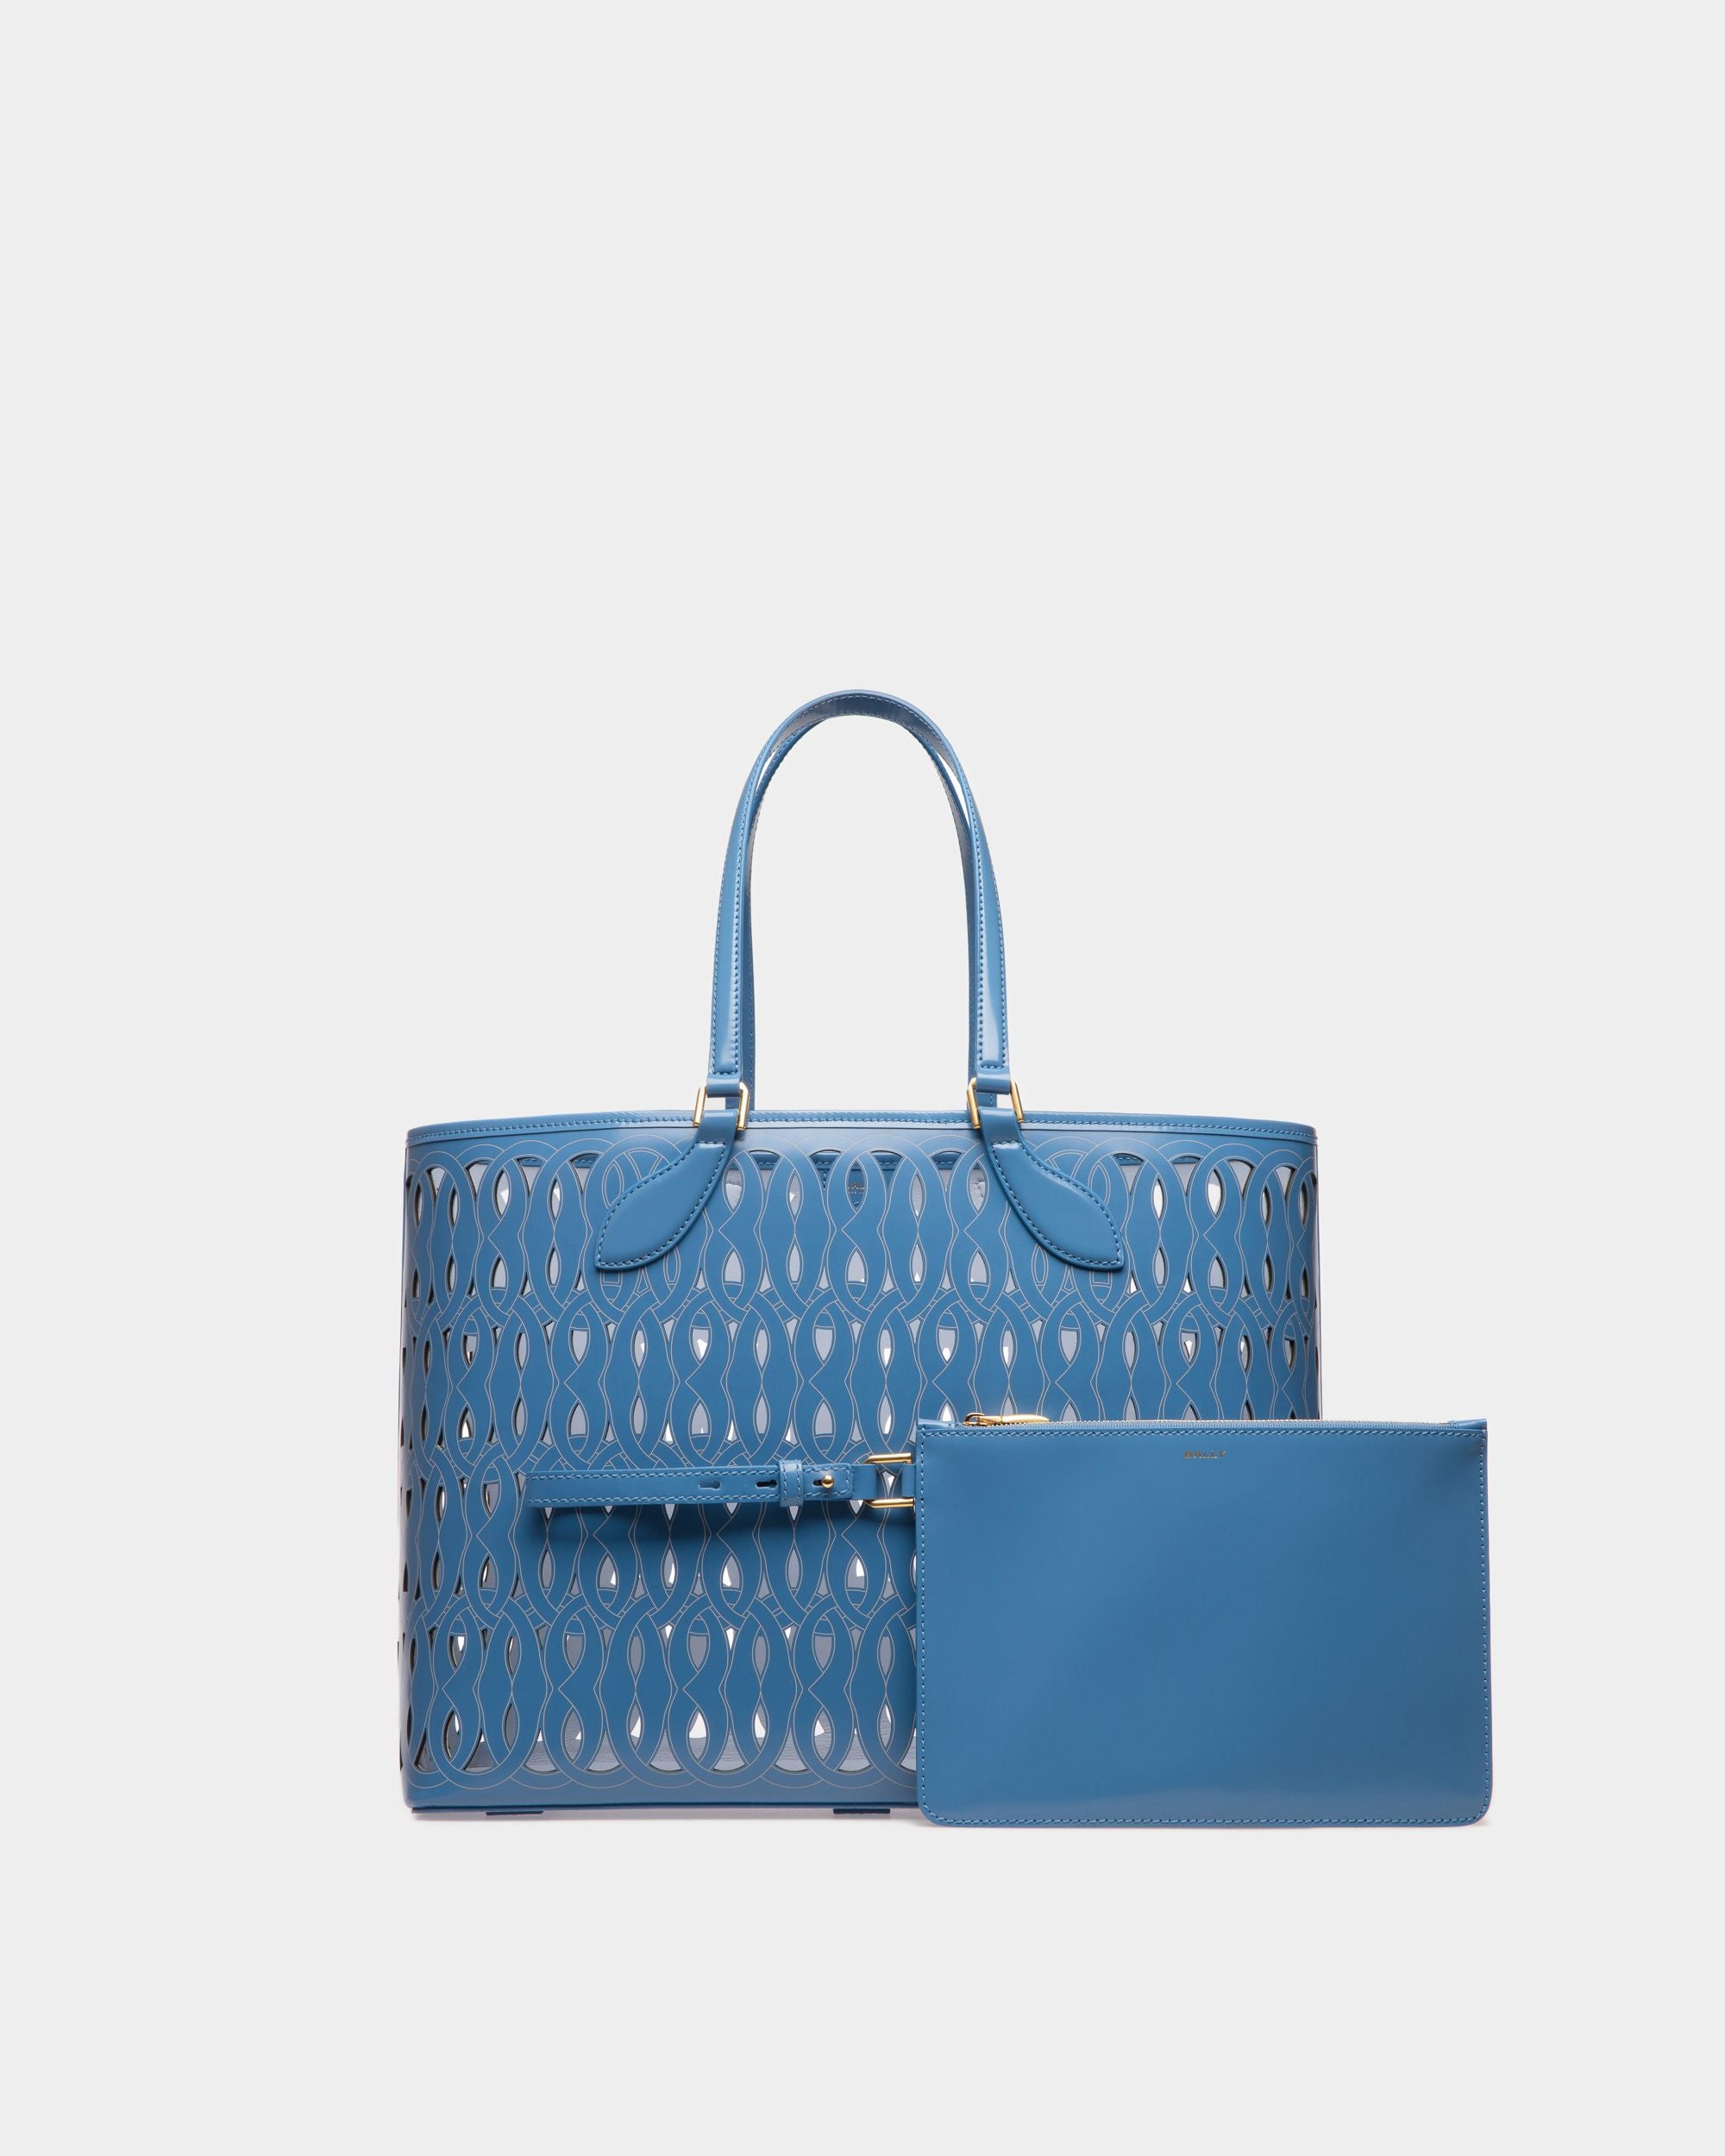 Lago | Women's Tote Bag | Blue Leather | Bally | Still Life Front